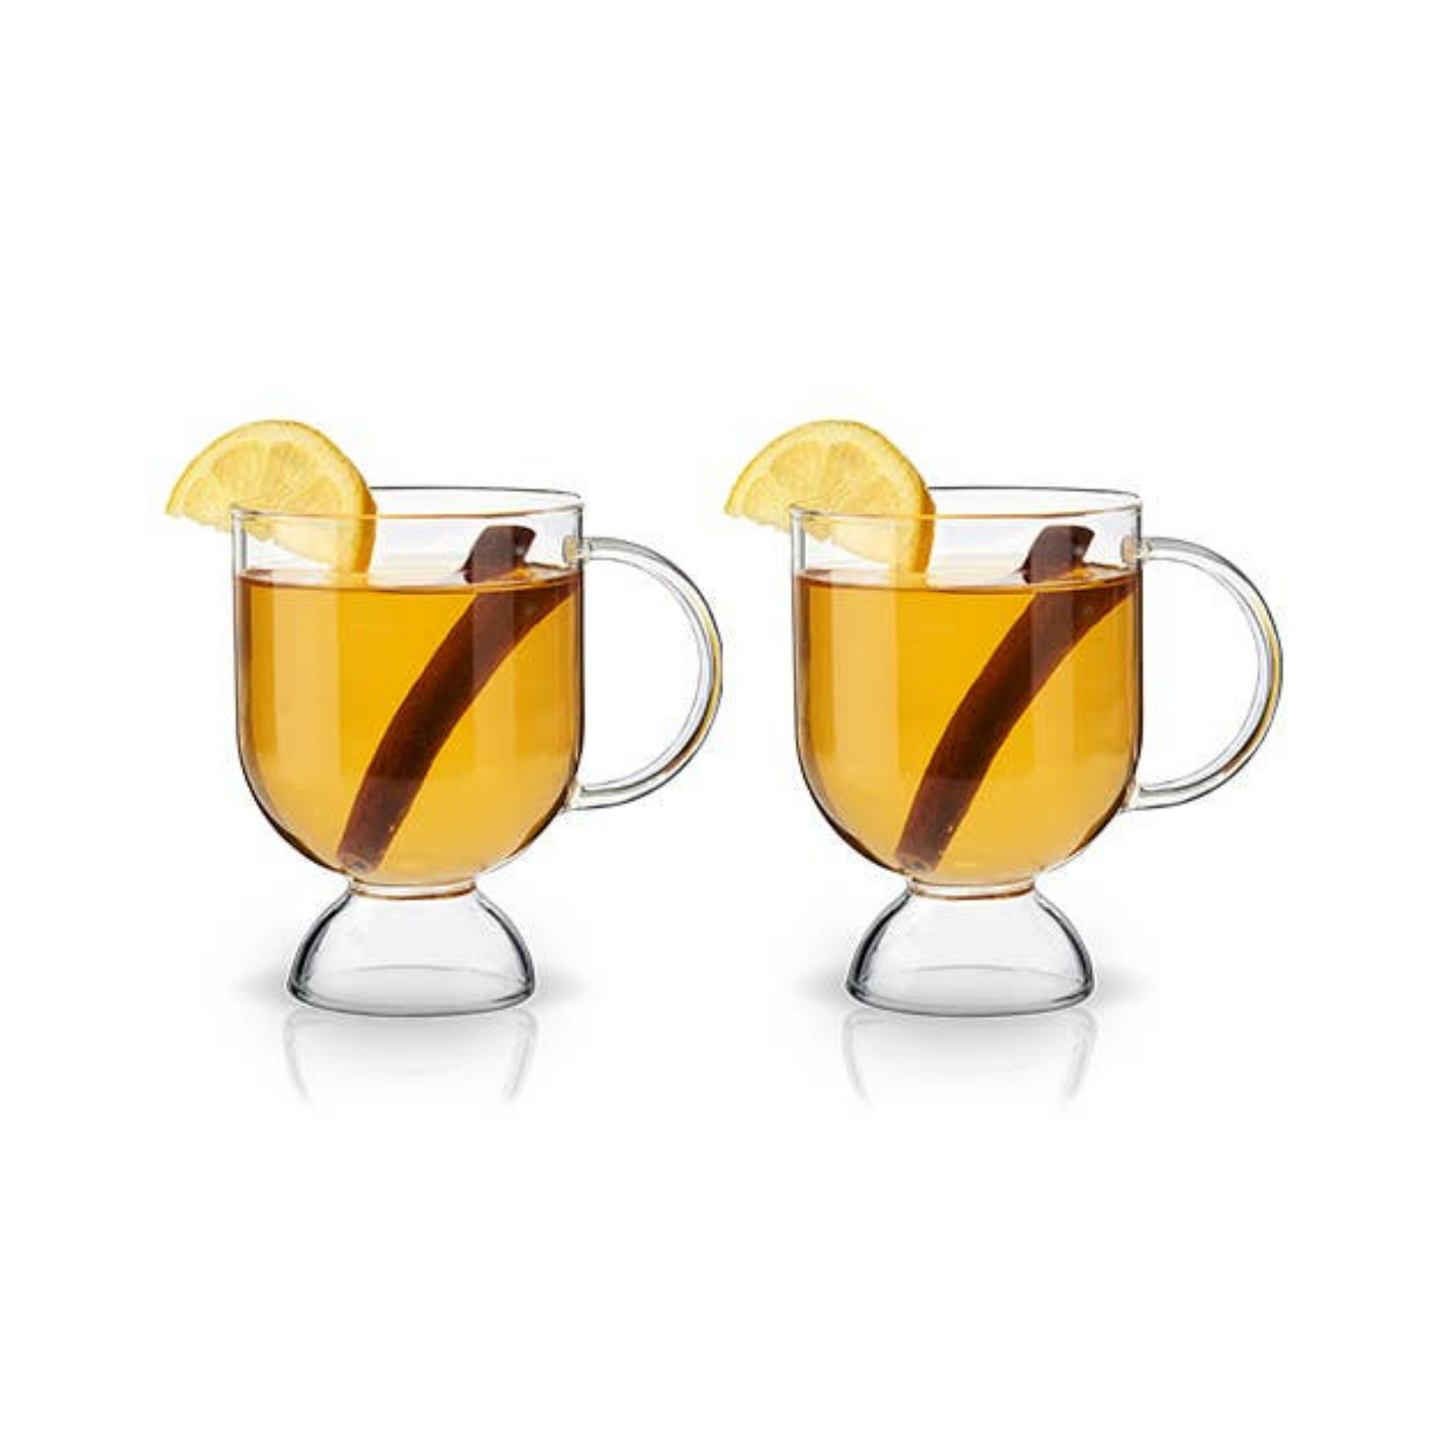 Hot Toddy Glasses (Set of 2)